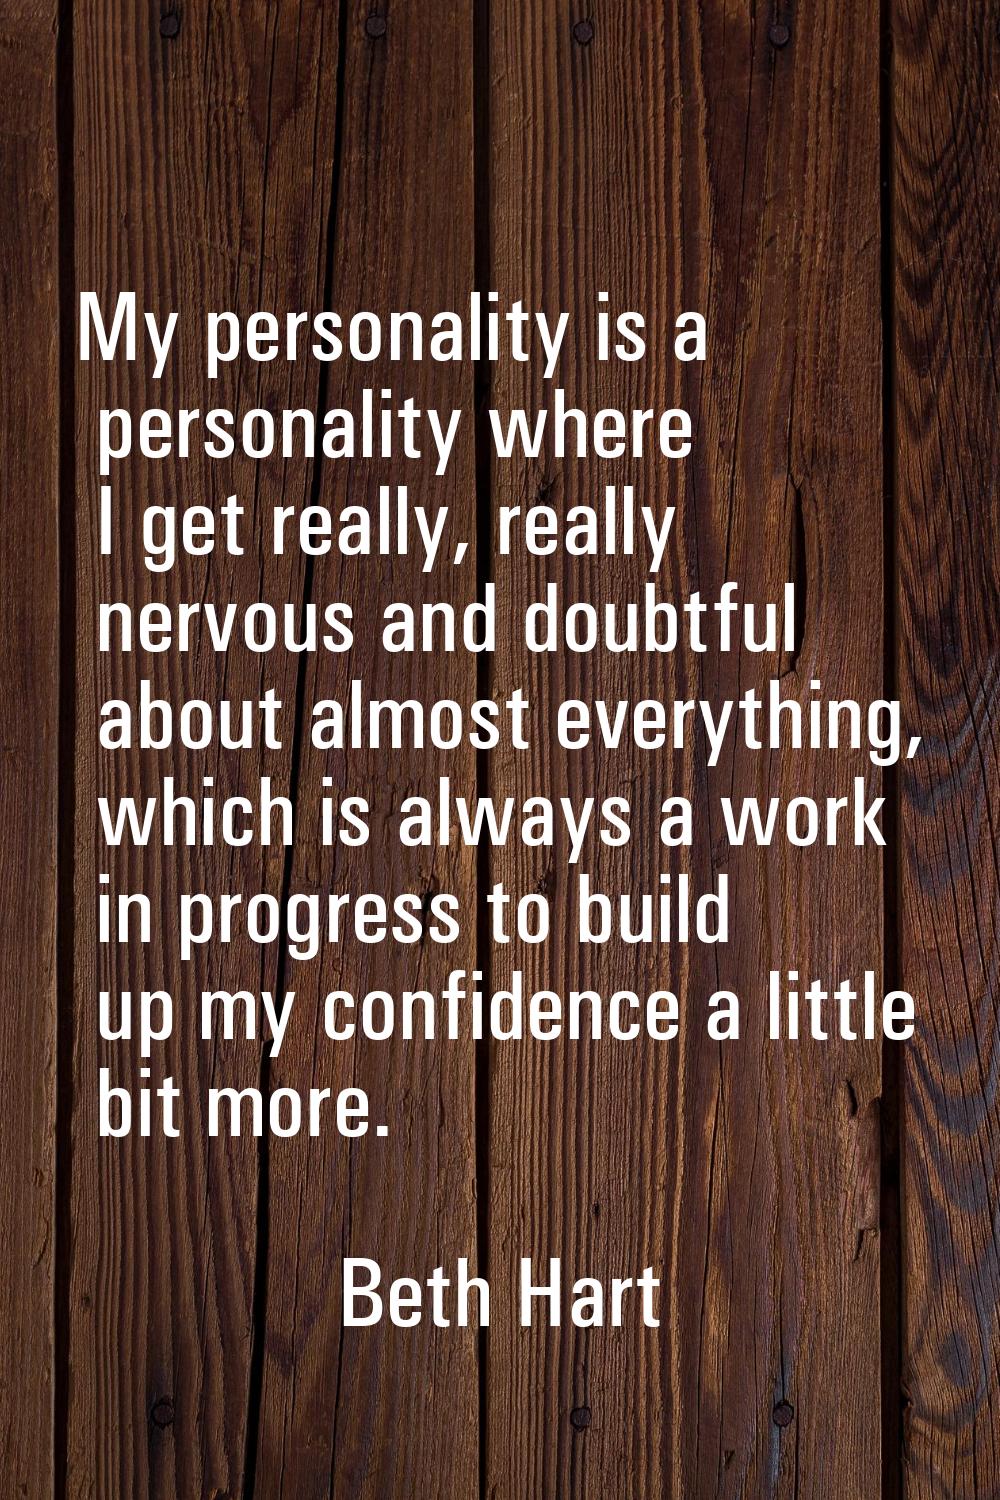 My personality is a personality where I get really, really nervous and doubtful about almost everyt